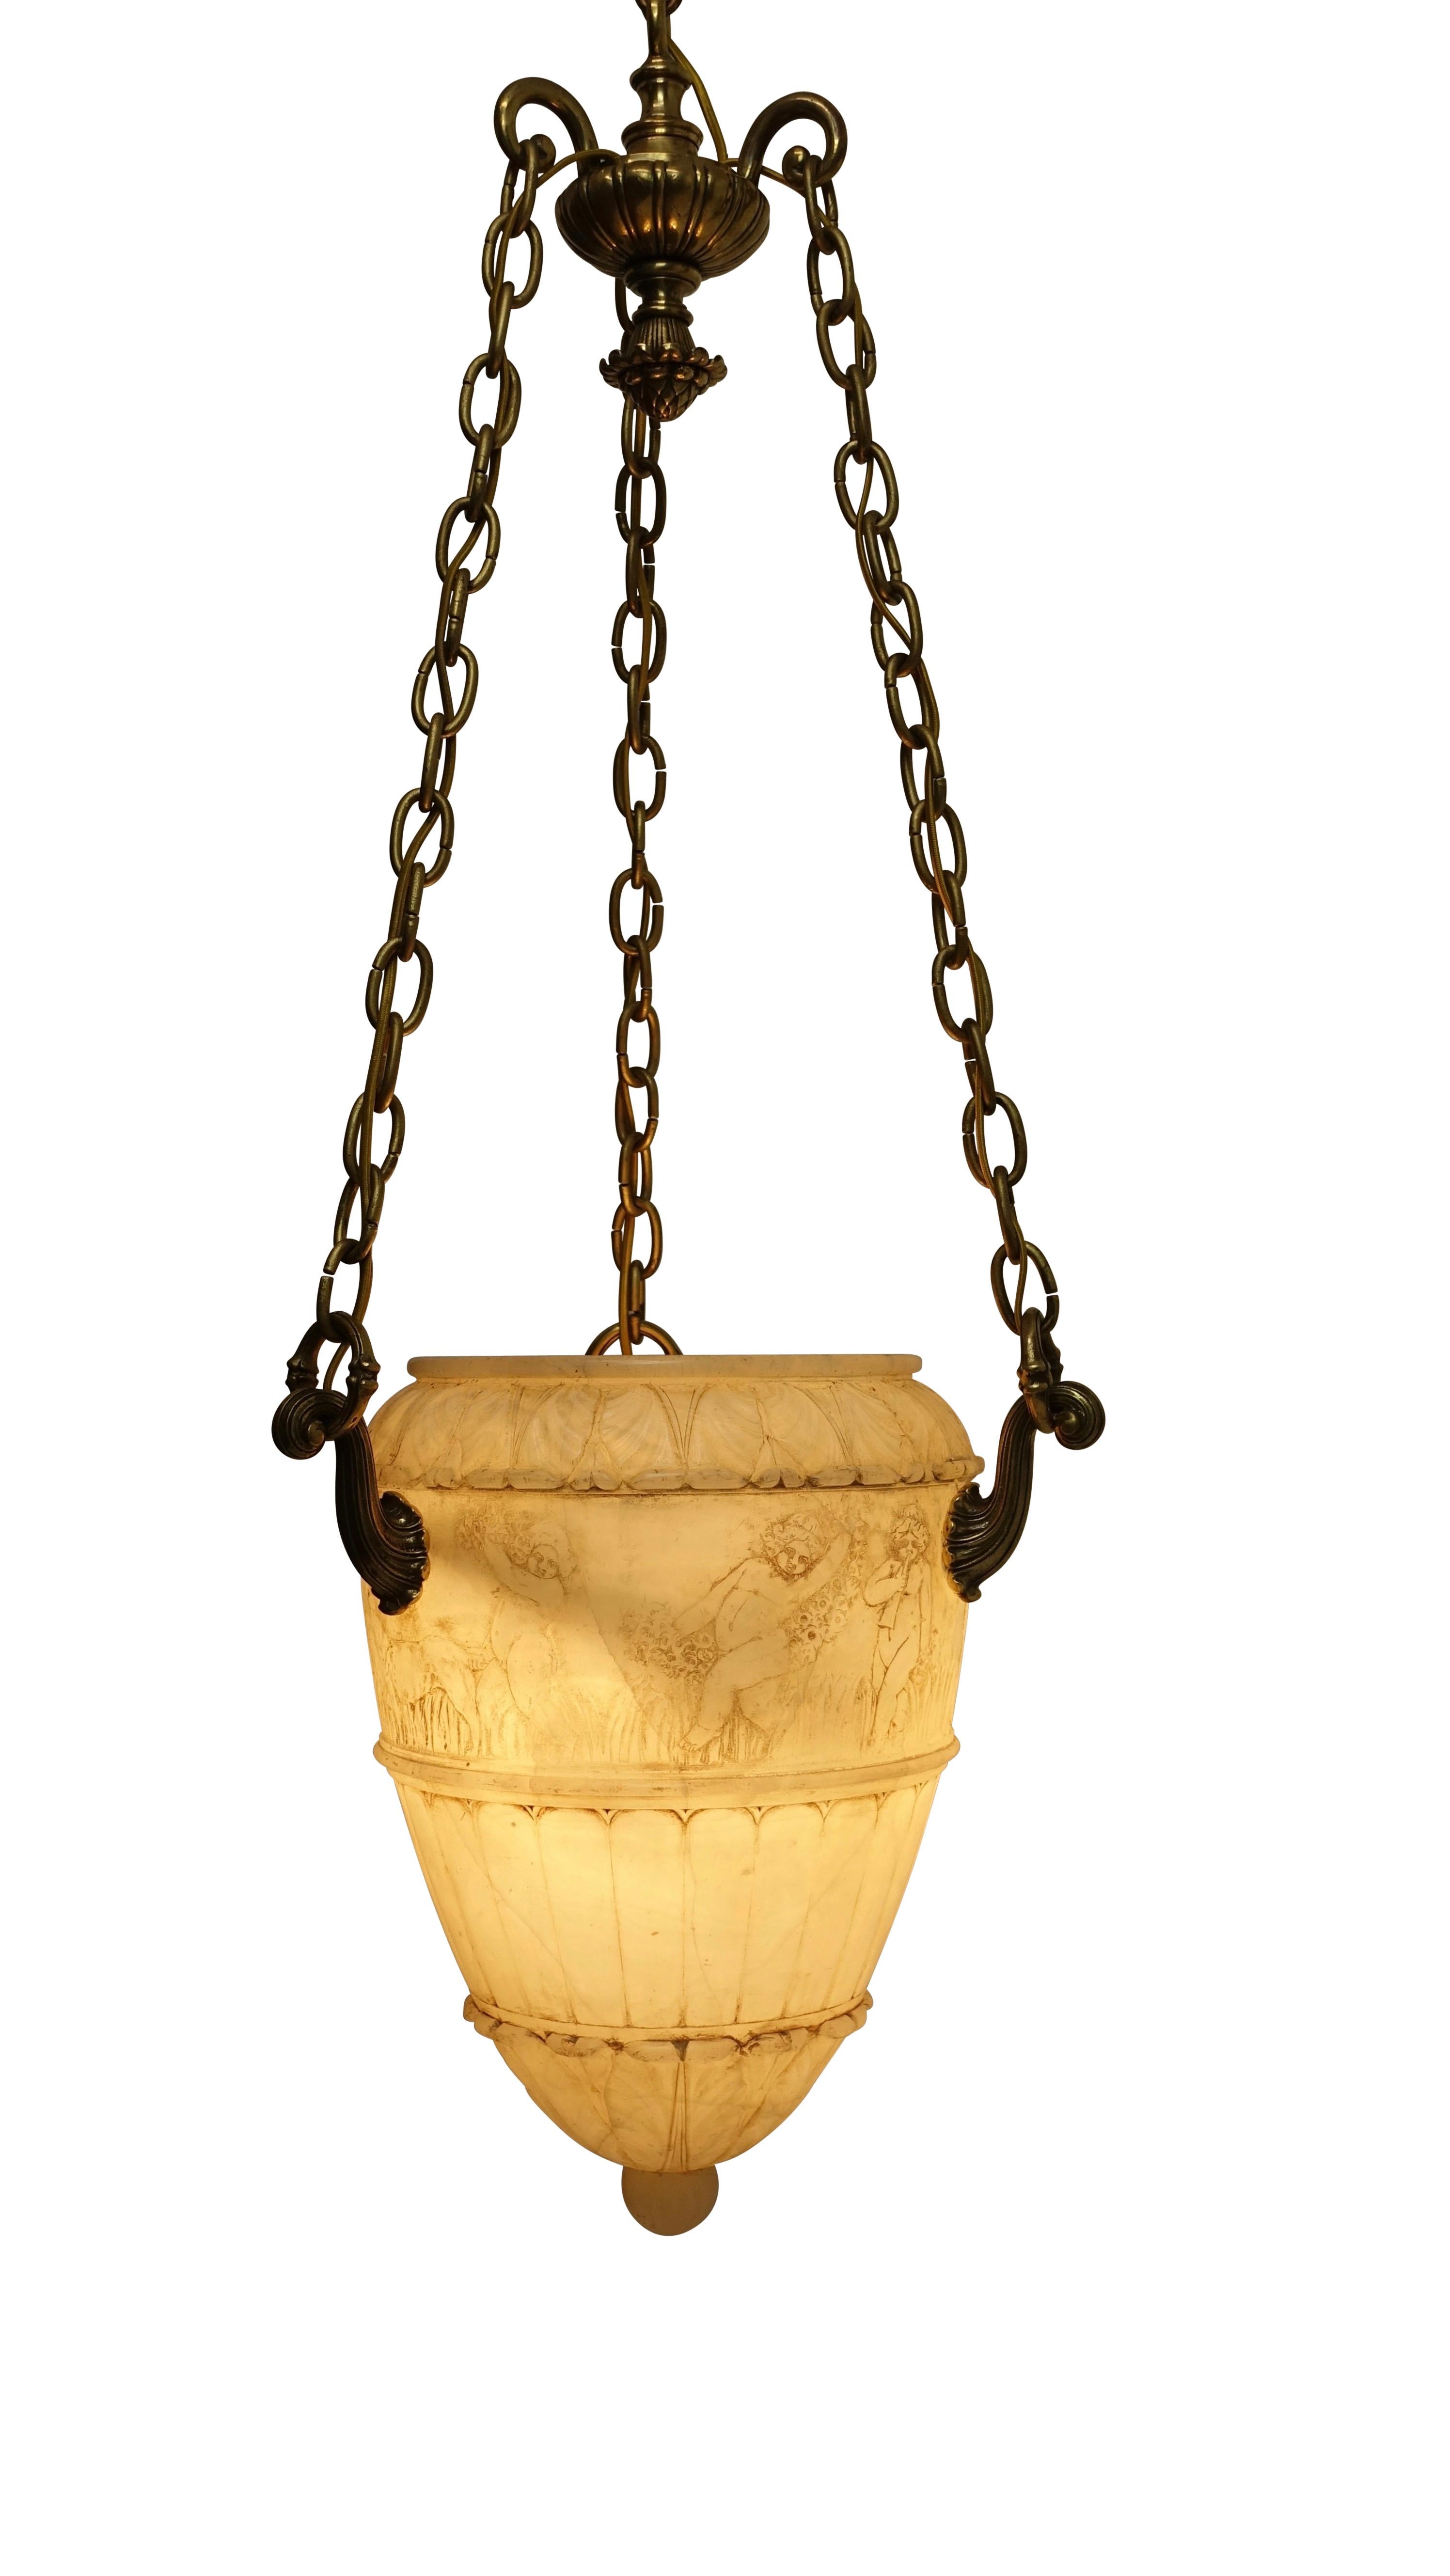 Carved Alabaster Pendant Light Fixture with Brass Hardware, Italian, circa 1910 For Sale 1